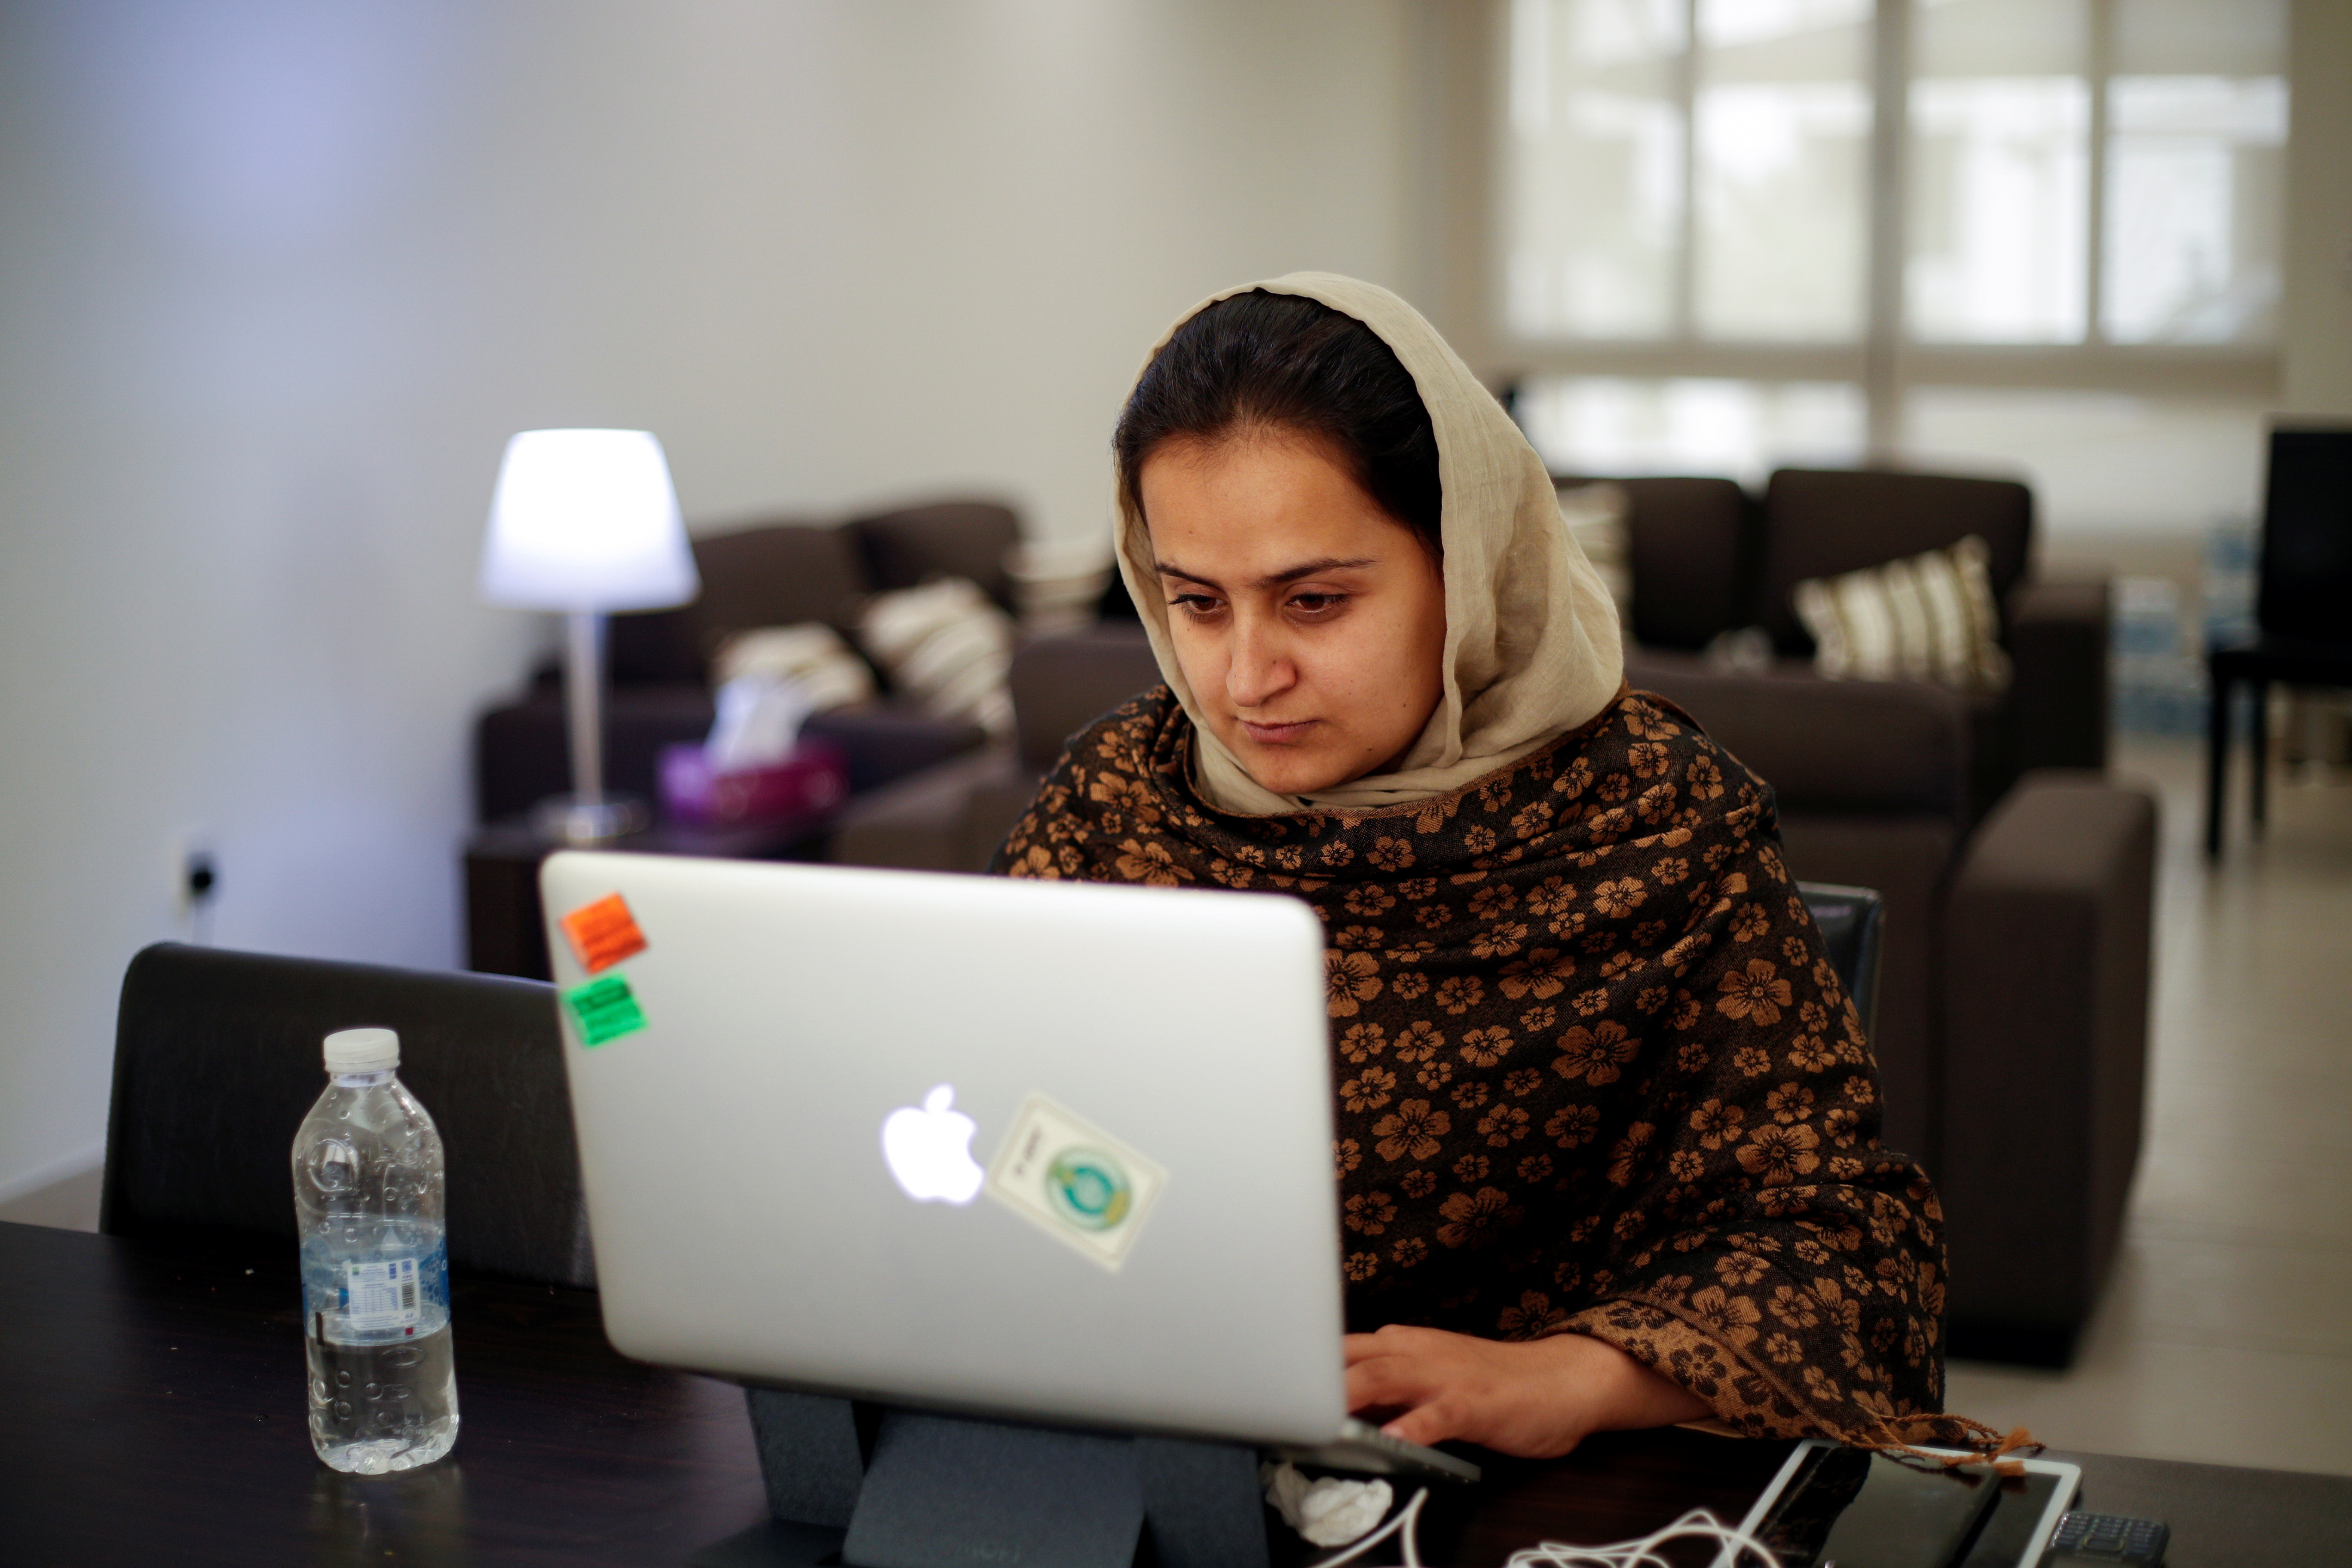 Afghan news anchor Beheshta Arghand works on laptop at a temporary residence compound in Doha